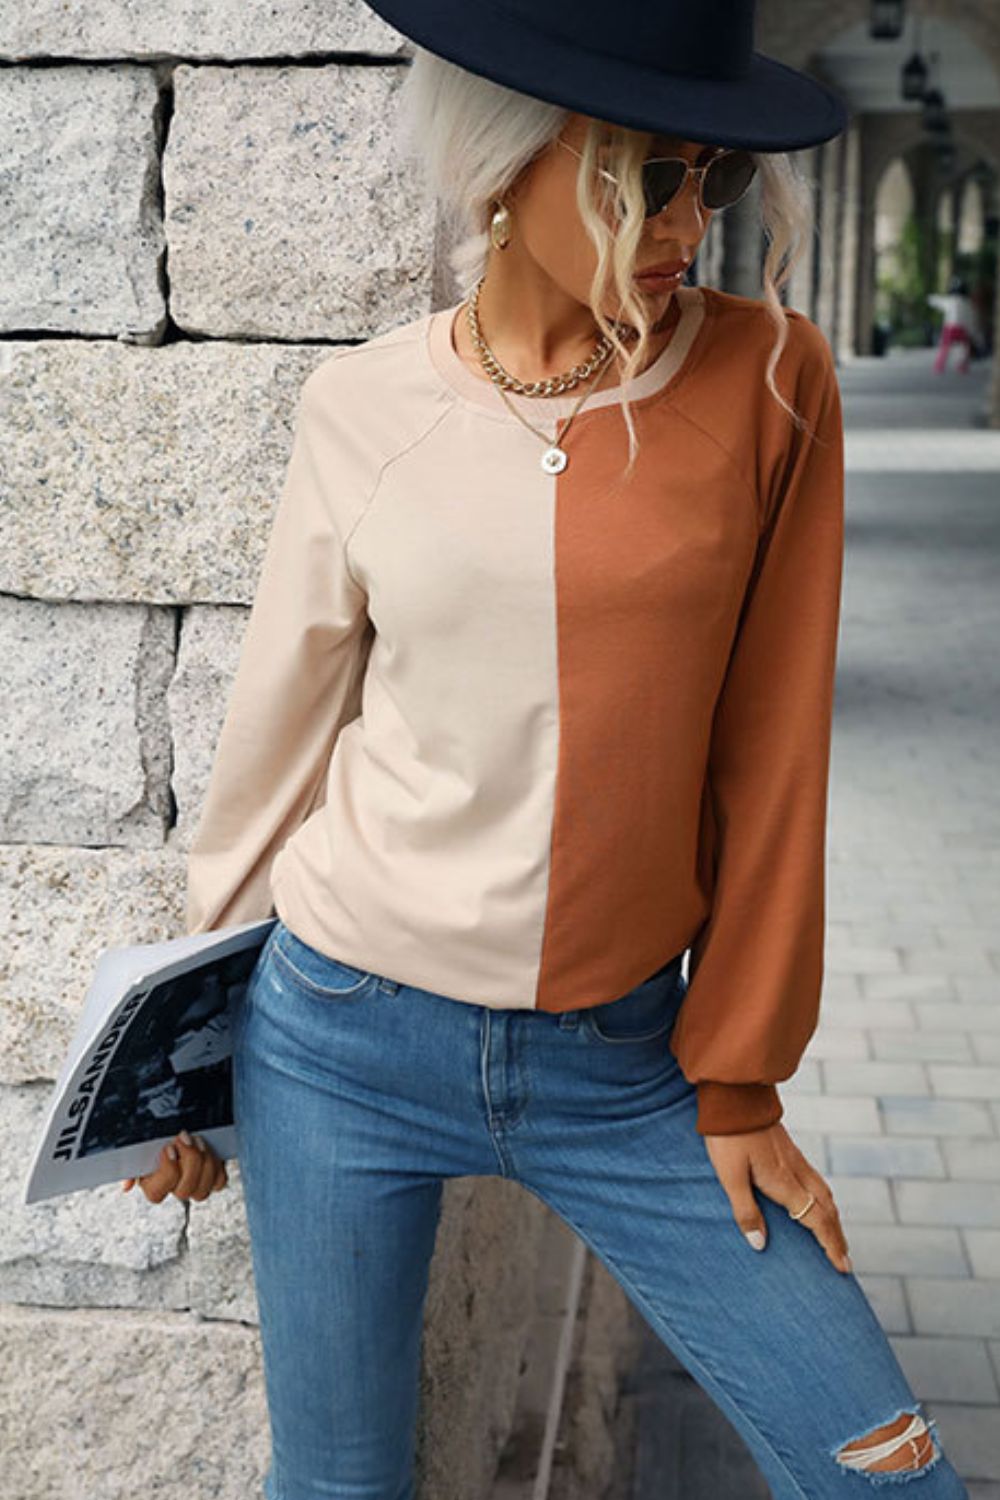 “Seeing Double” is a long sleeve sweatshirt featuring coloring blocking, round neckline, raglan sleeves, cuffed sleeves and hemline.The colors are khaki and brown. Sizes small through x-large.